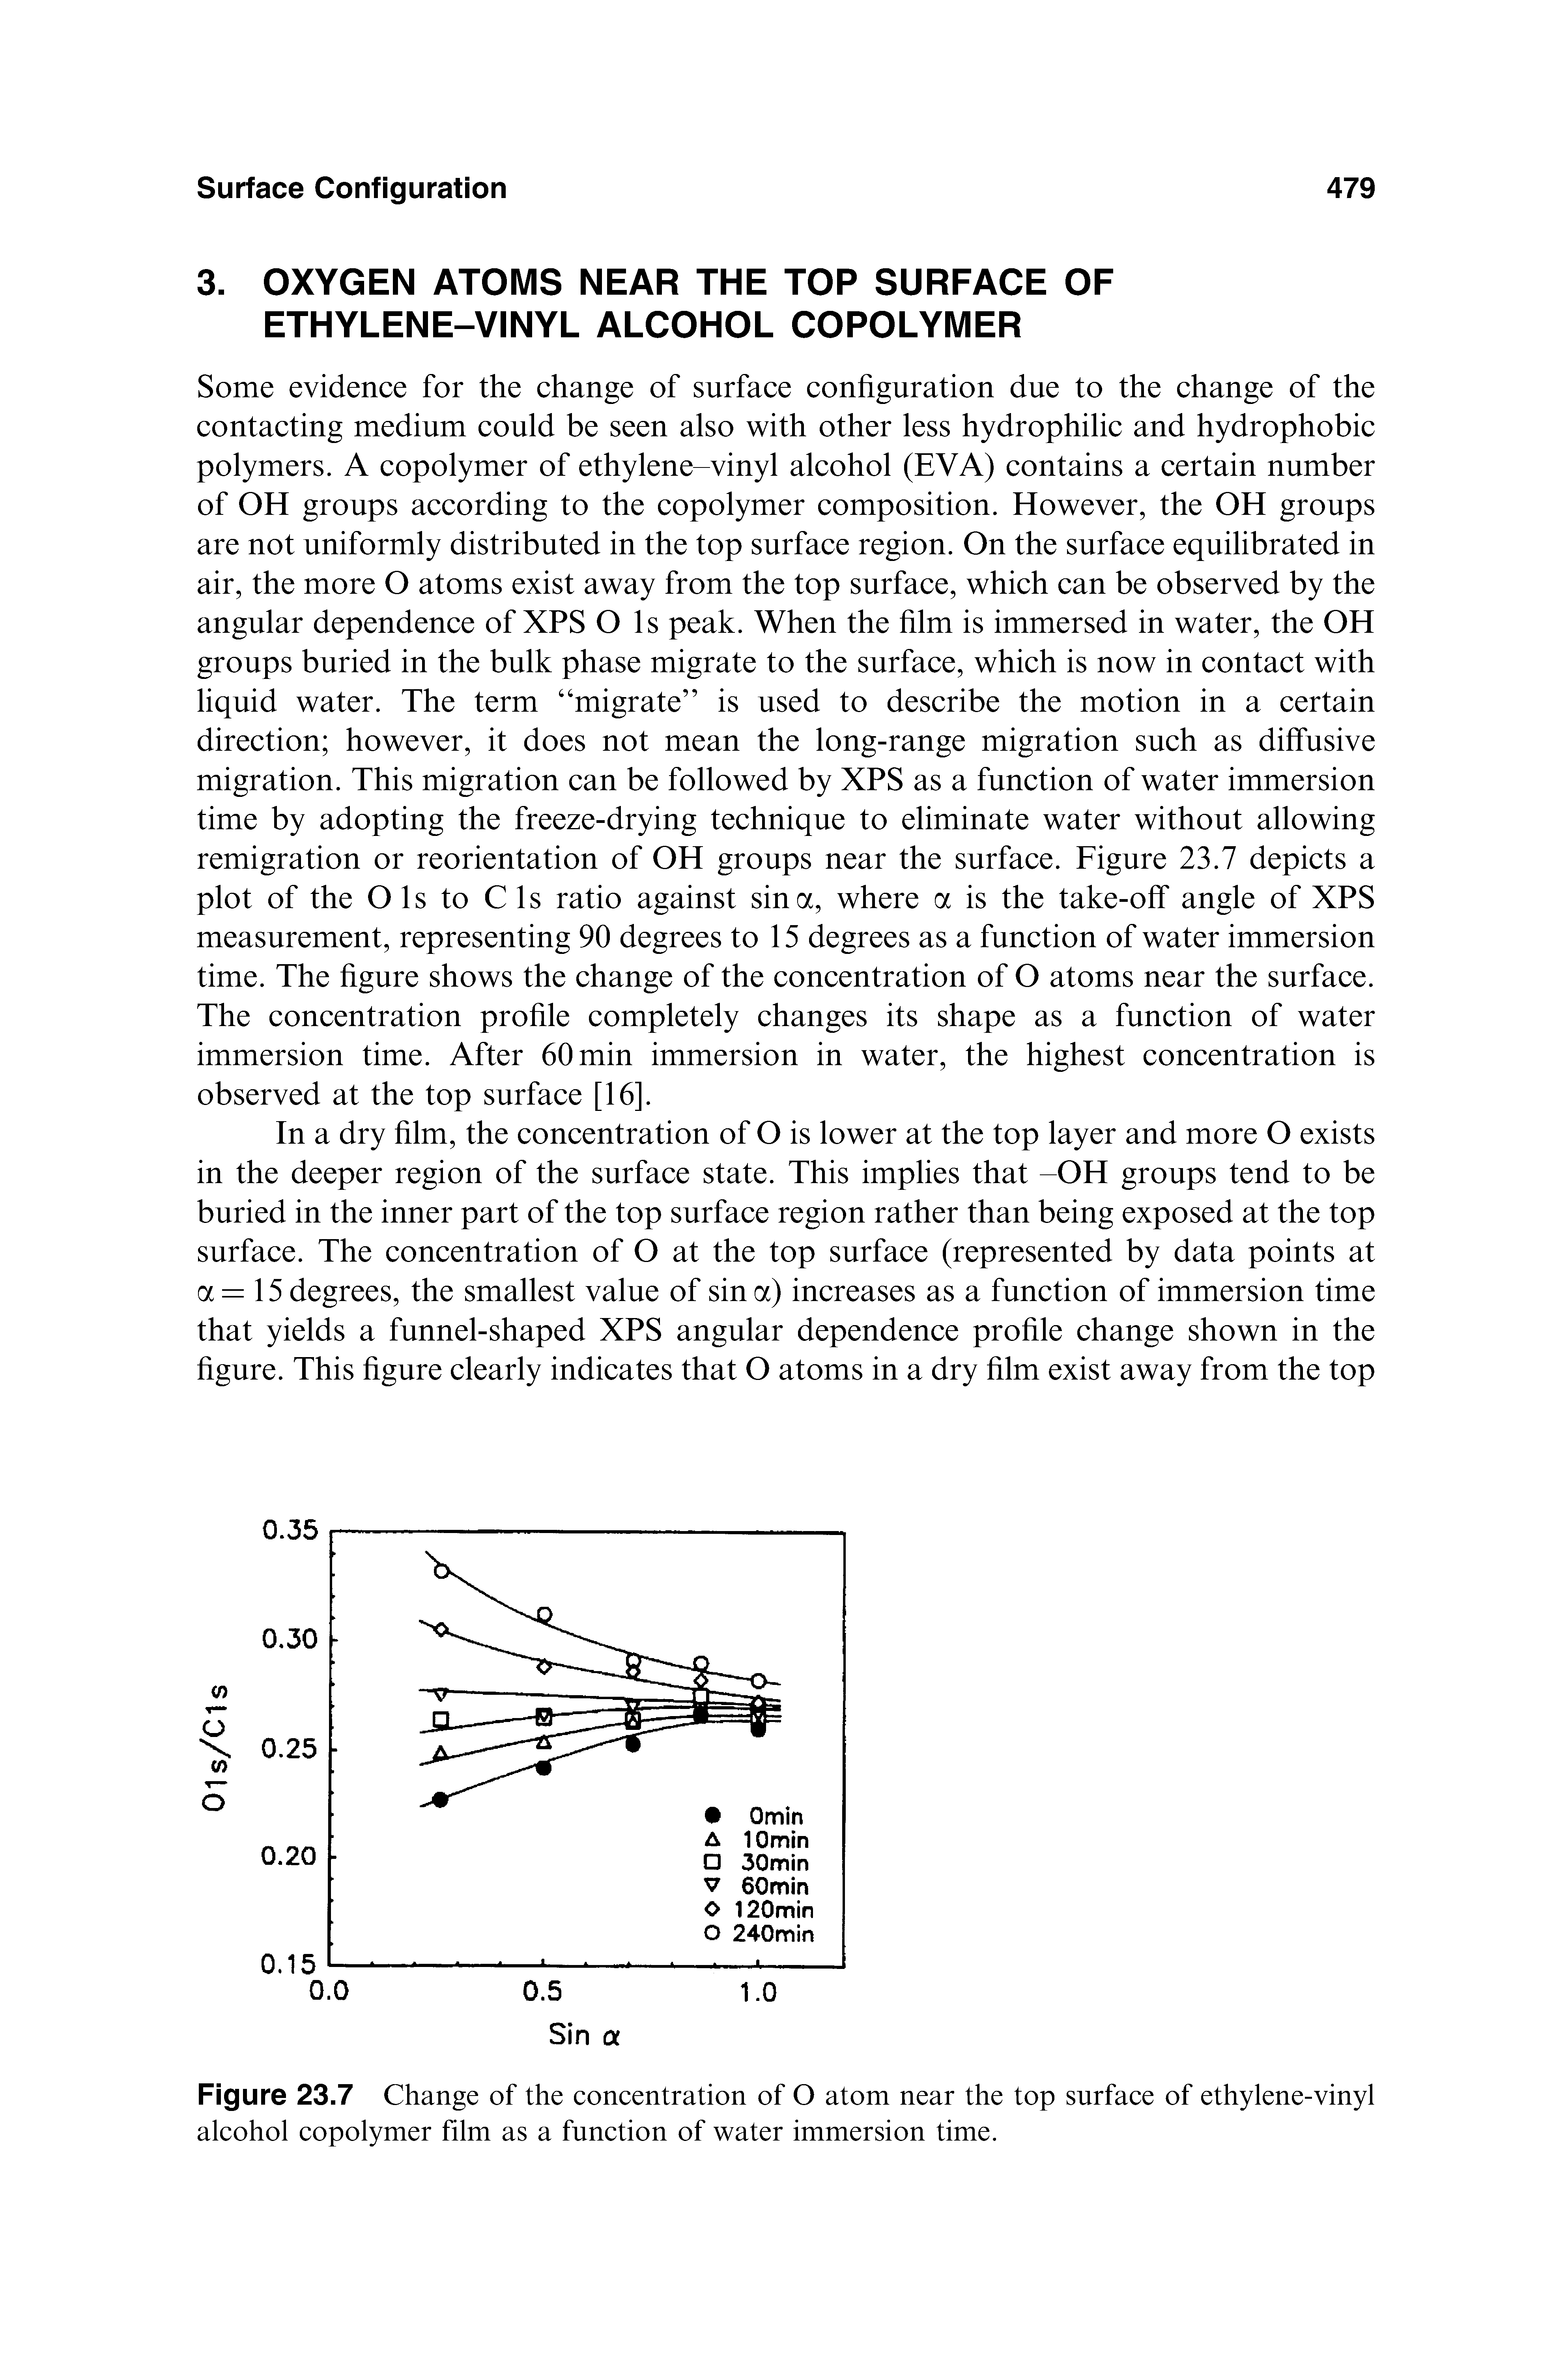 Figure 23.7 Change of the concentration of O atom near the top surface of ethylene-vinyl alcohol copolymer film as a function of water immersion time.